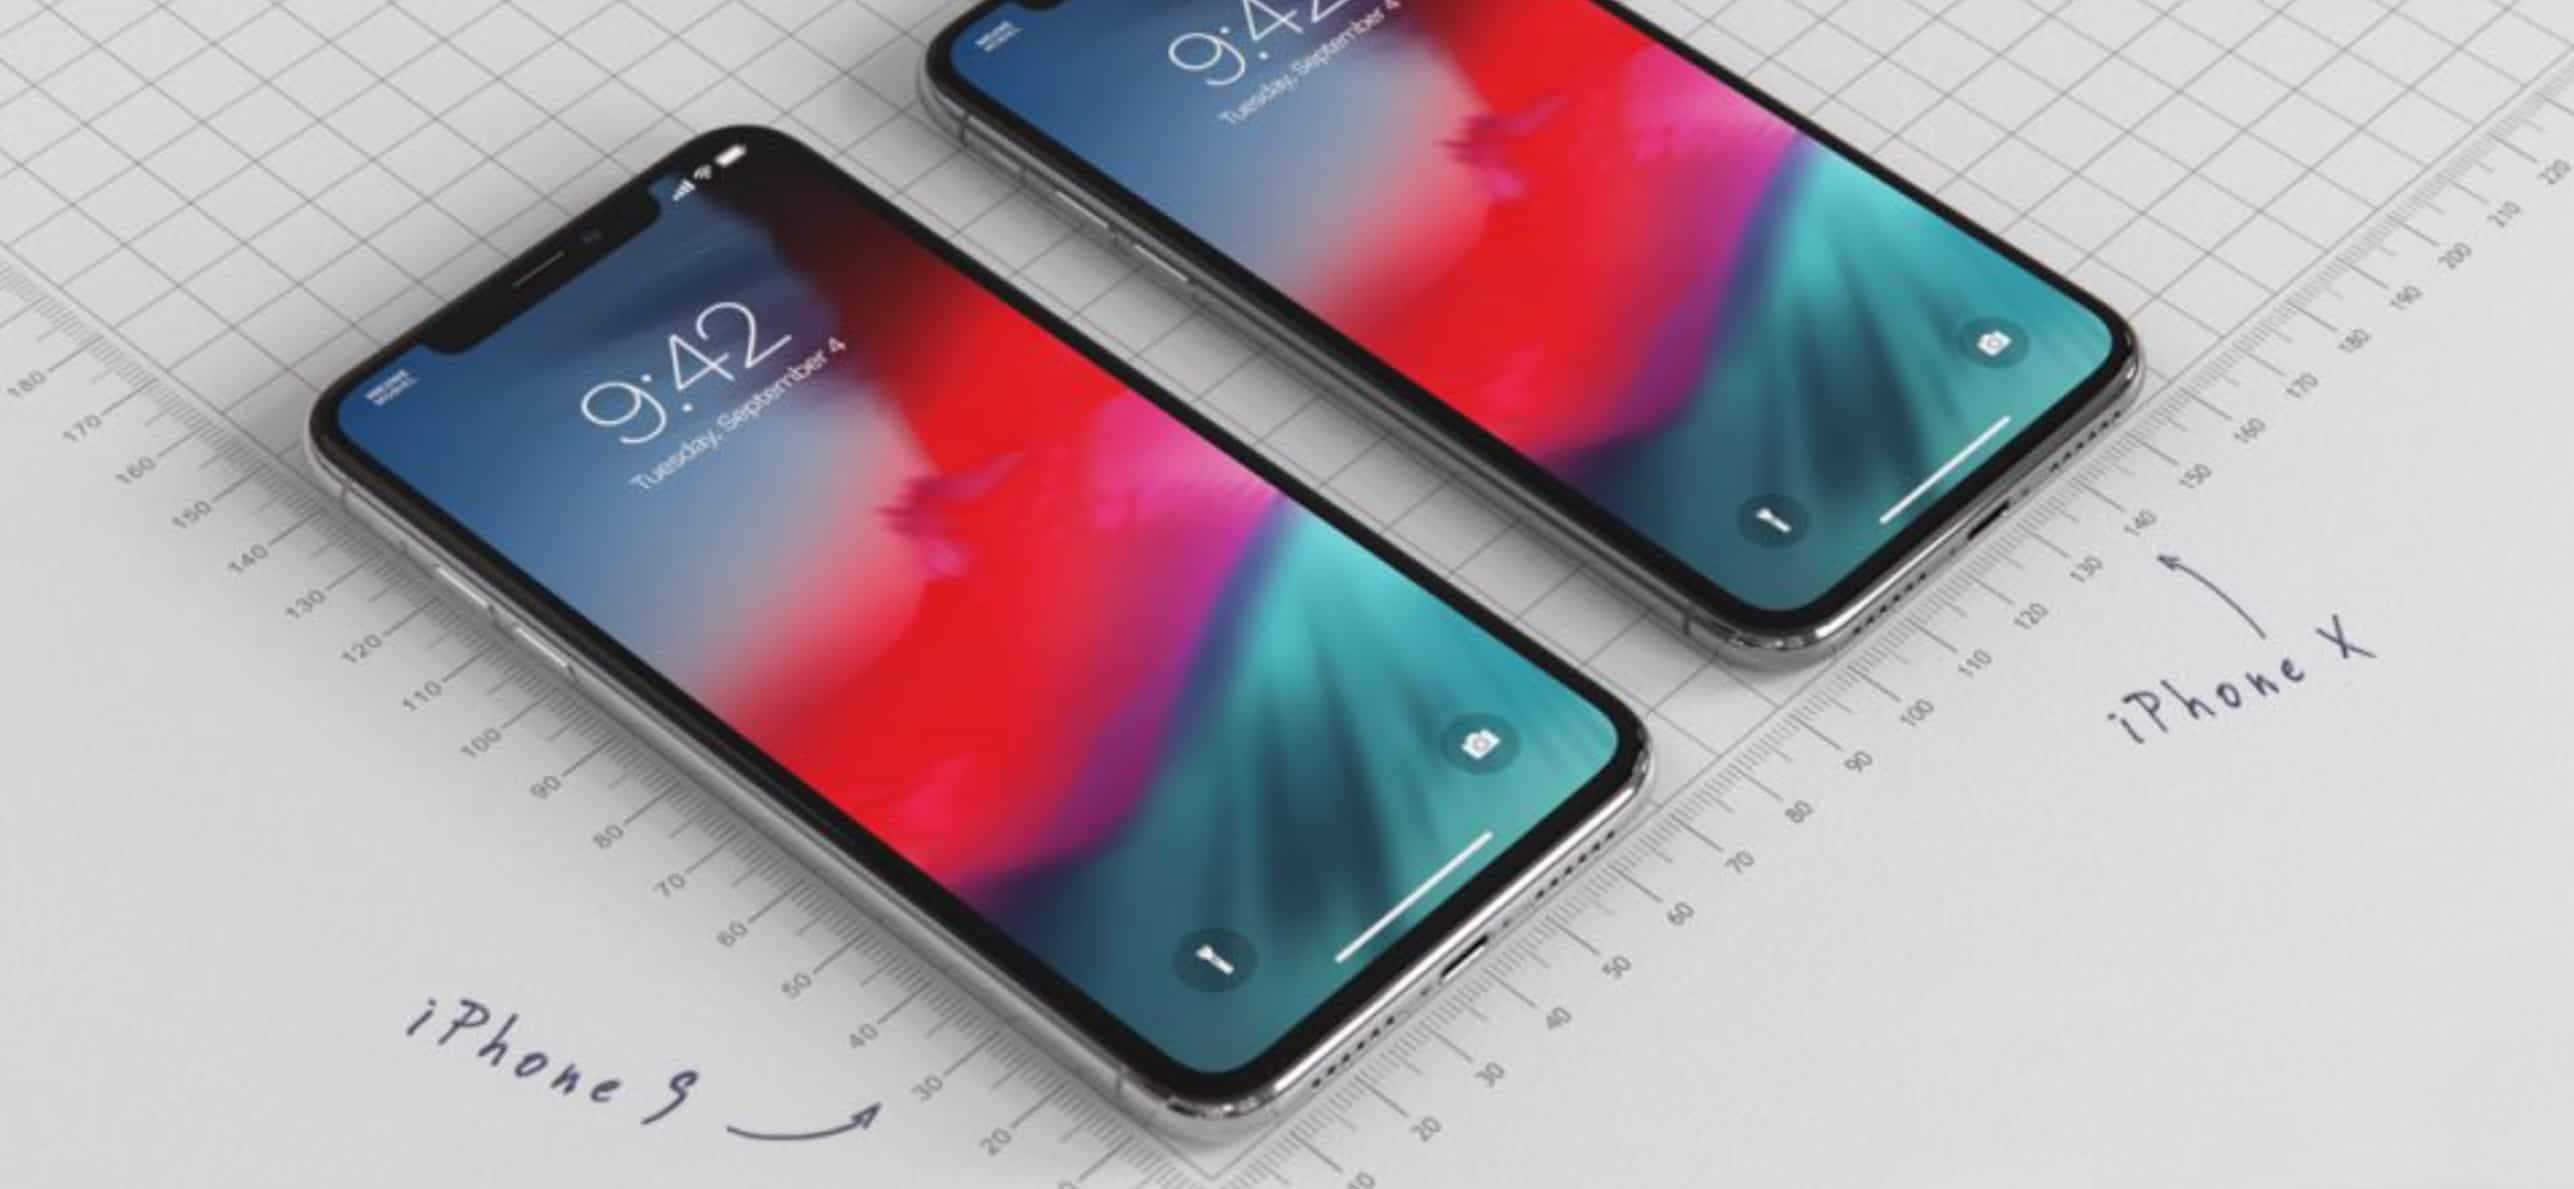 2018 iPhone compared to 2017 iPhone X